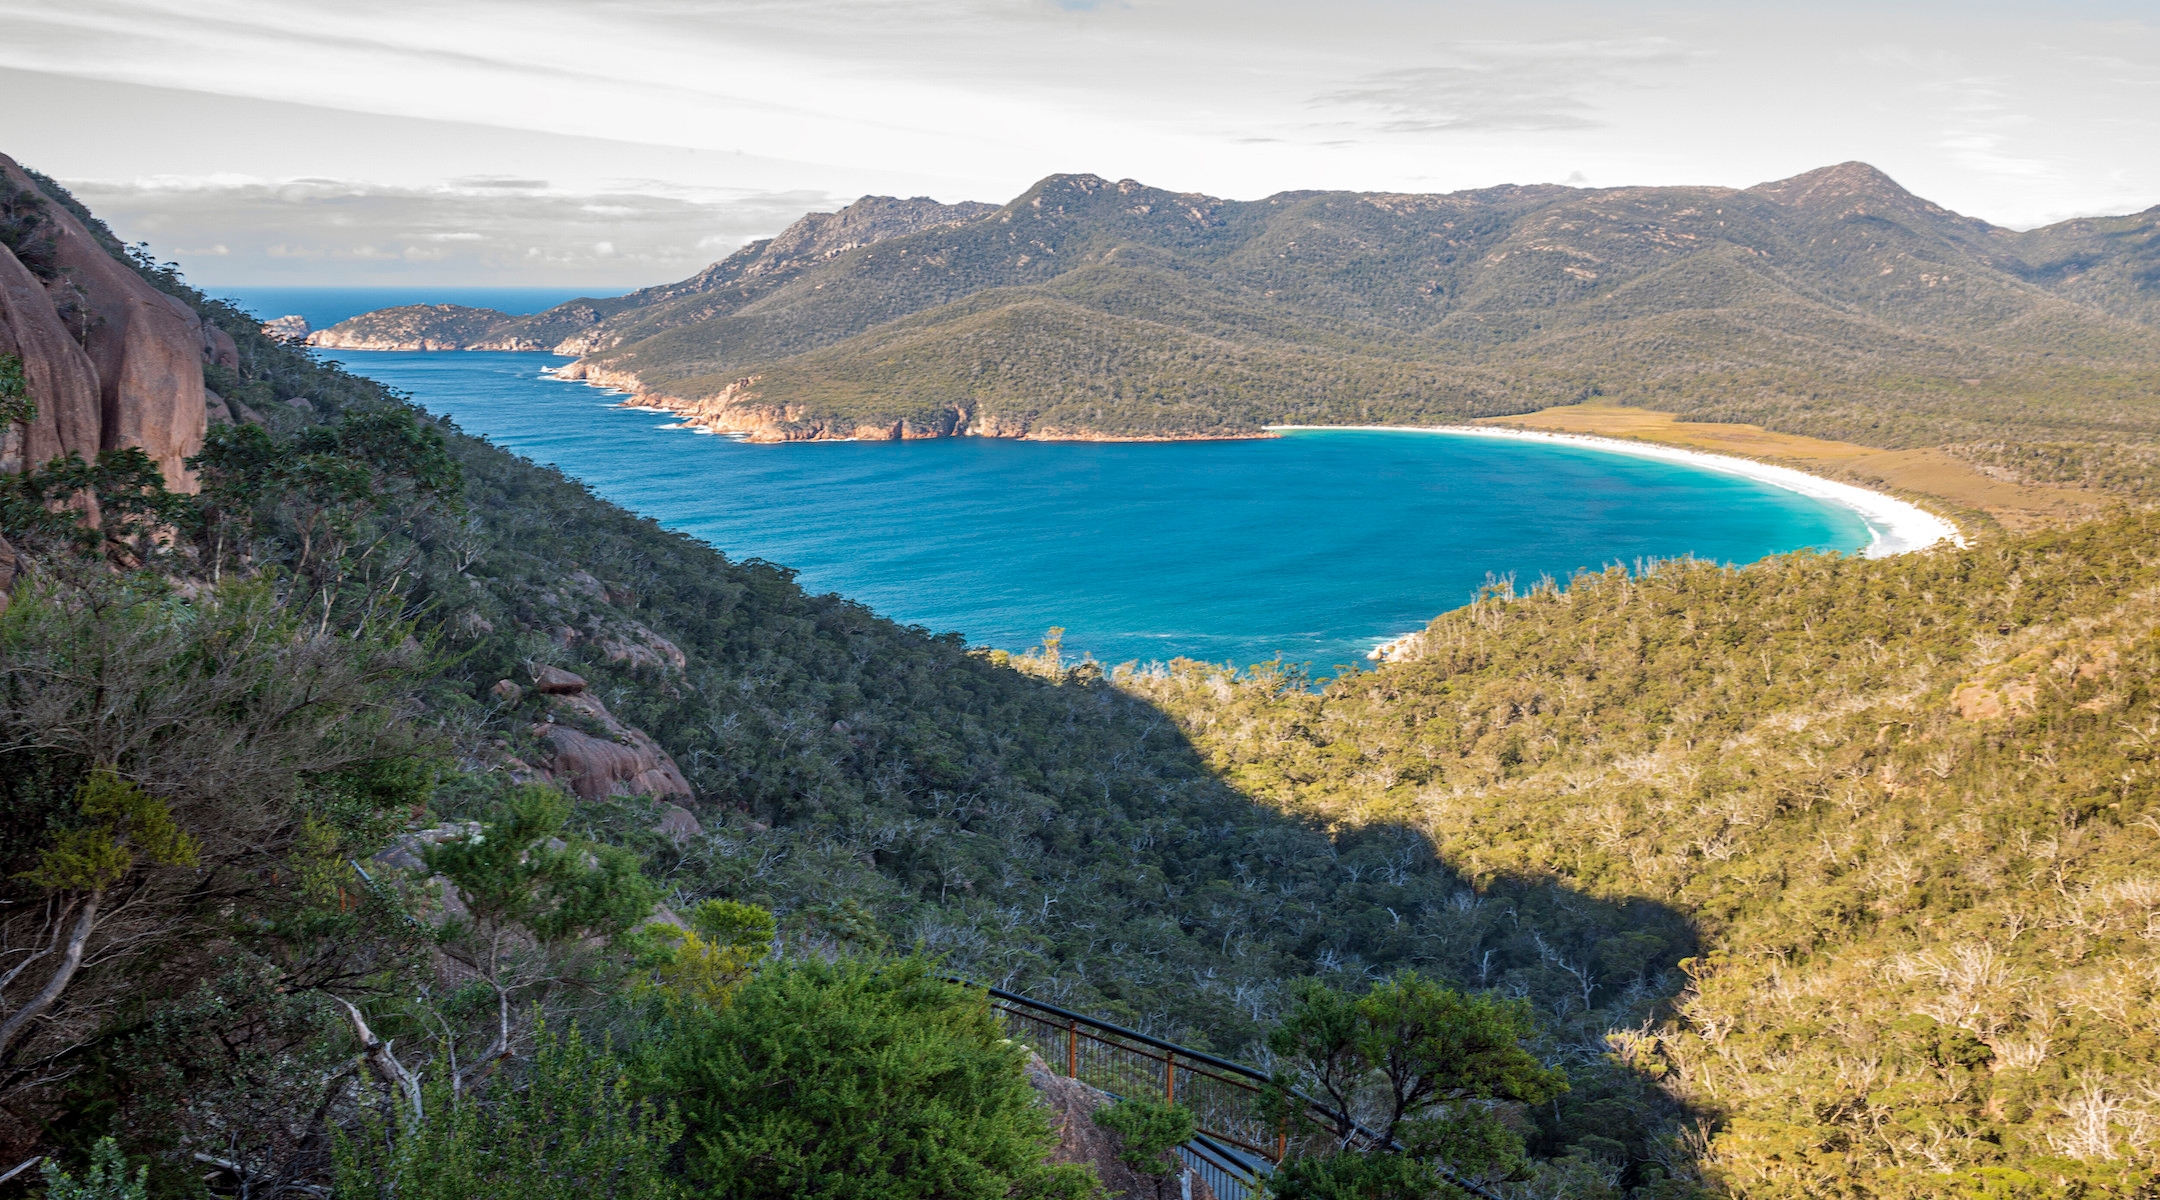 Wineglass Bay is one of Tasmania’s biggest tourist attractions. (Leisa Tyler/LightRocket via Getty Images)